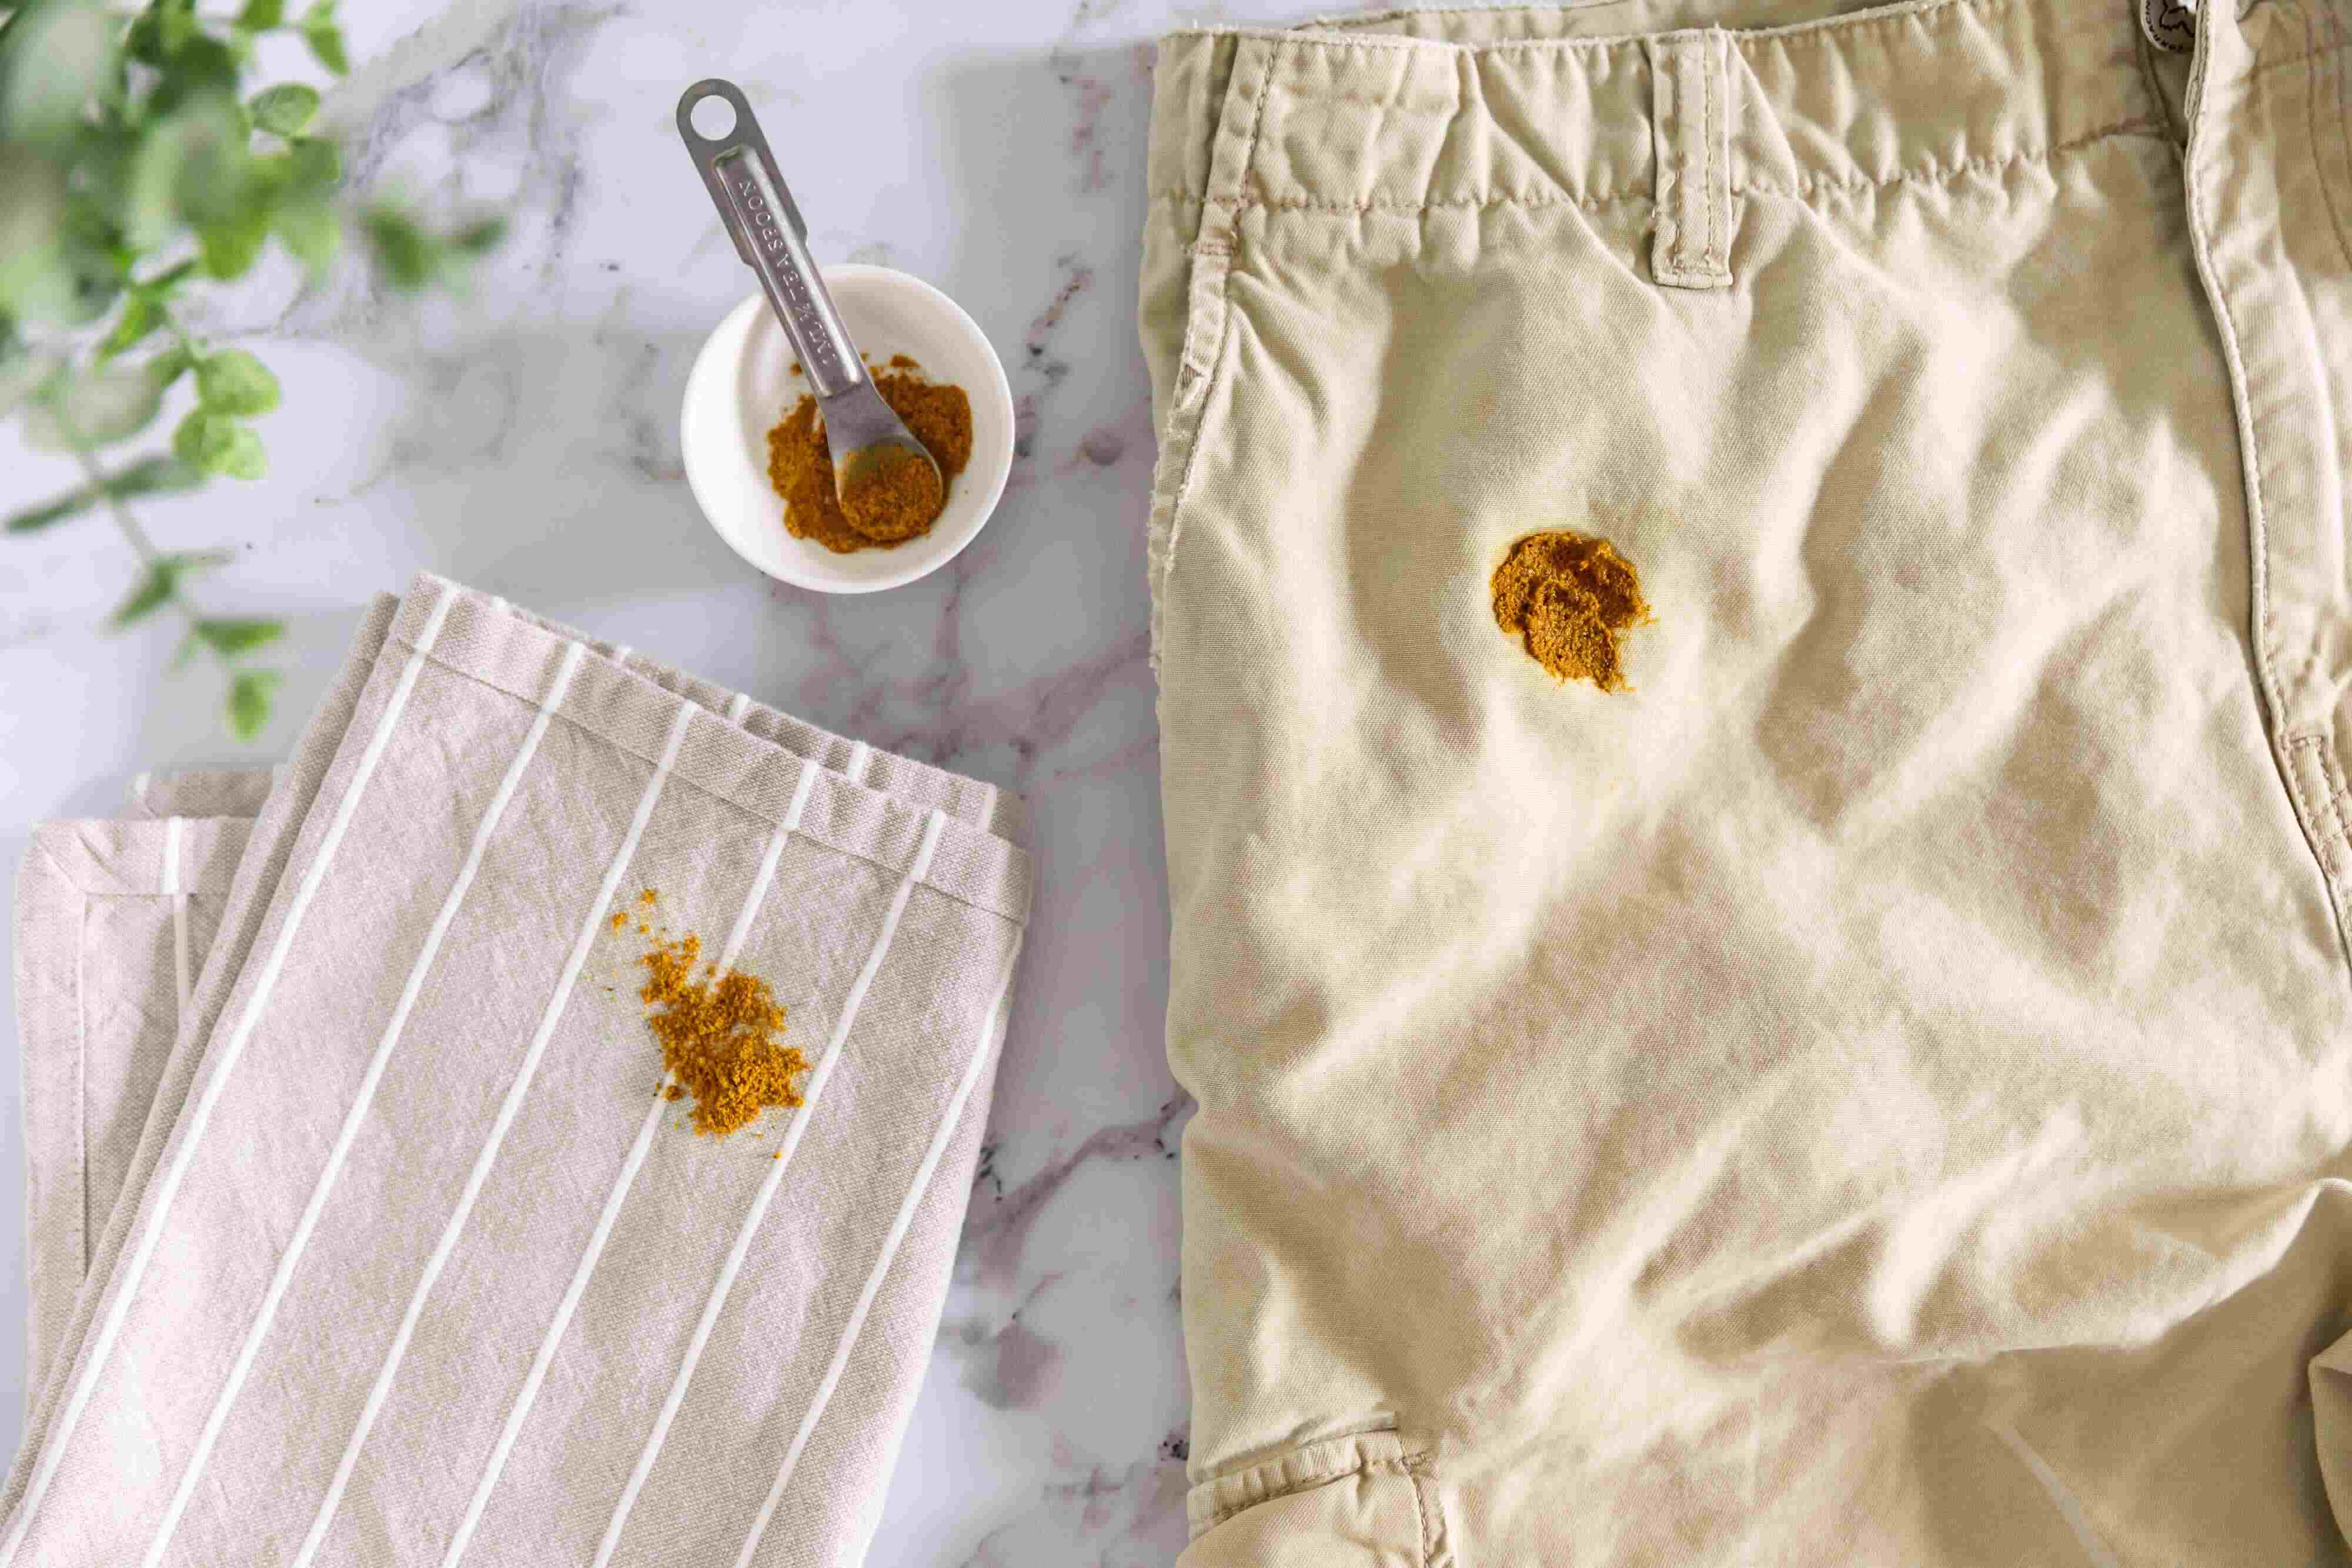 How To Remove Turmeric Stains From Household Items